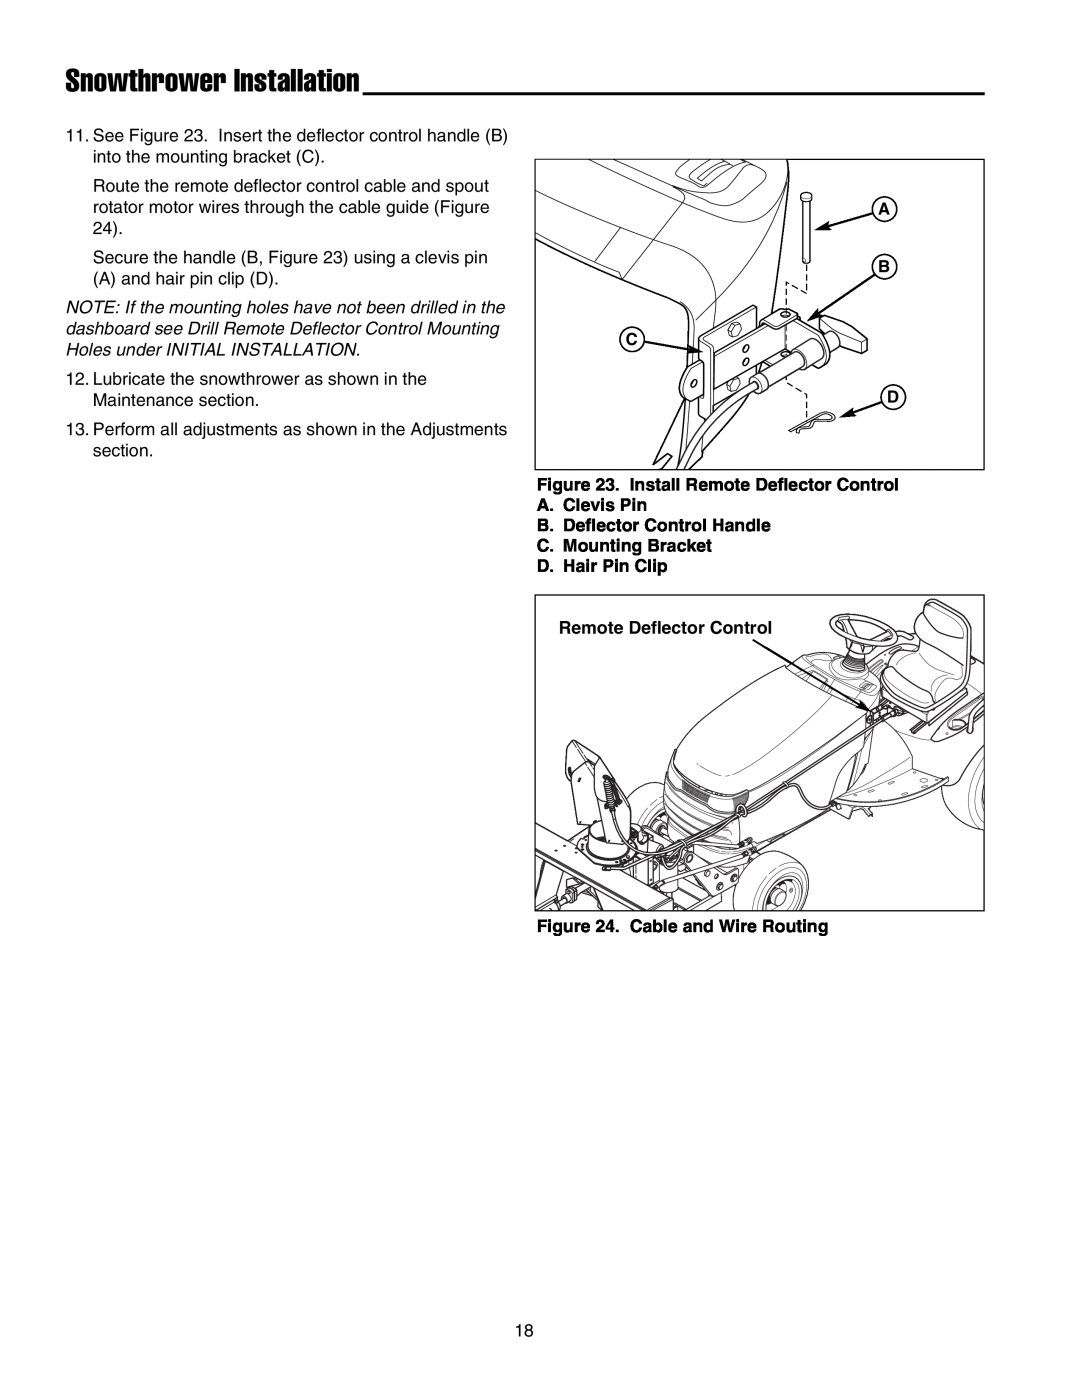 Simplicity 1694404 Snowthrower Installation, A B C D, Install Remote Deflector Control, C.Mounting Bracket D.Hair Pin Clip 